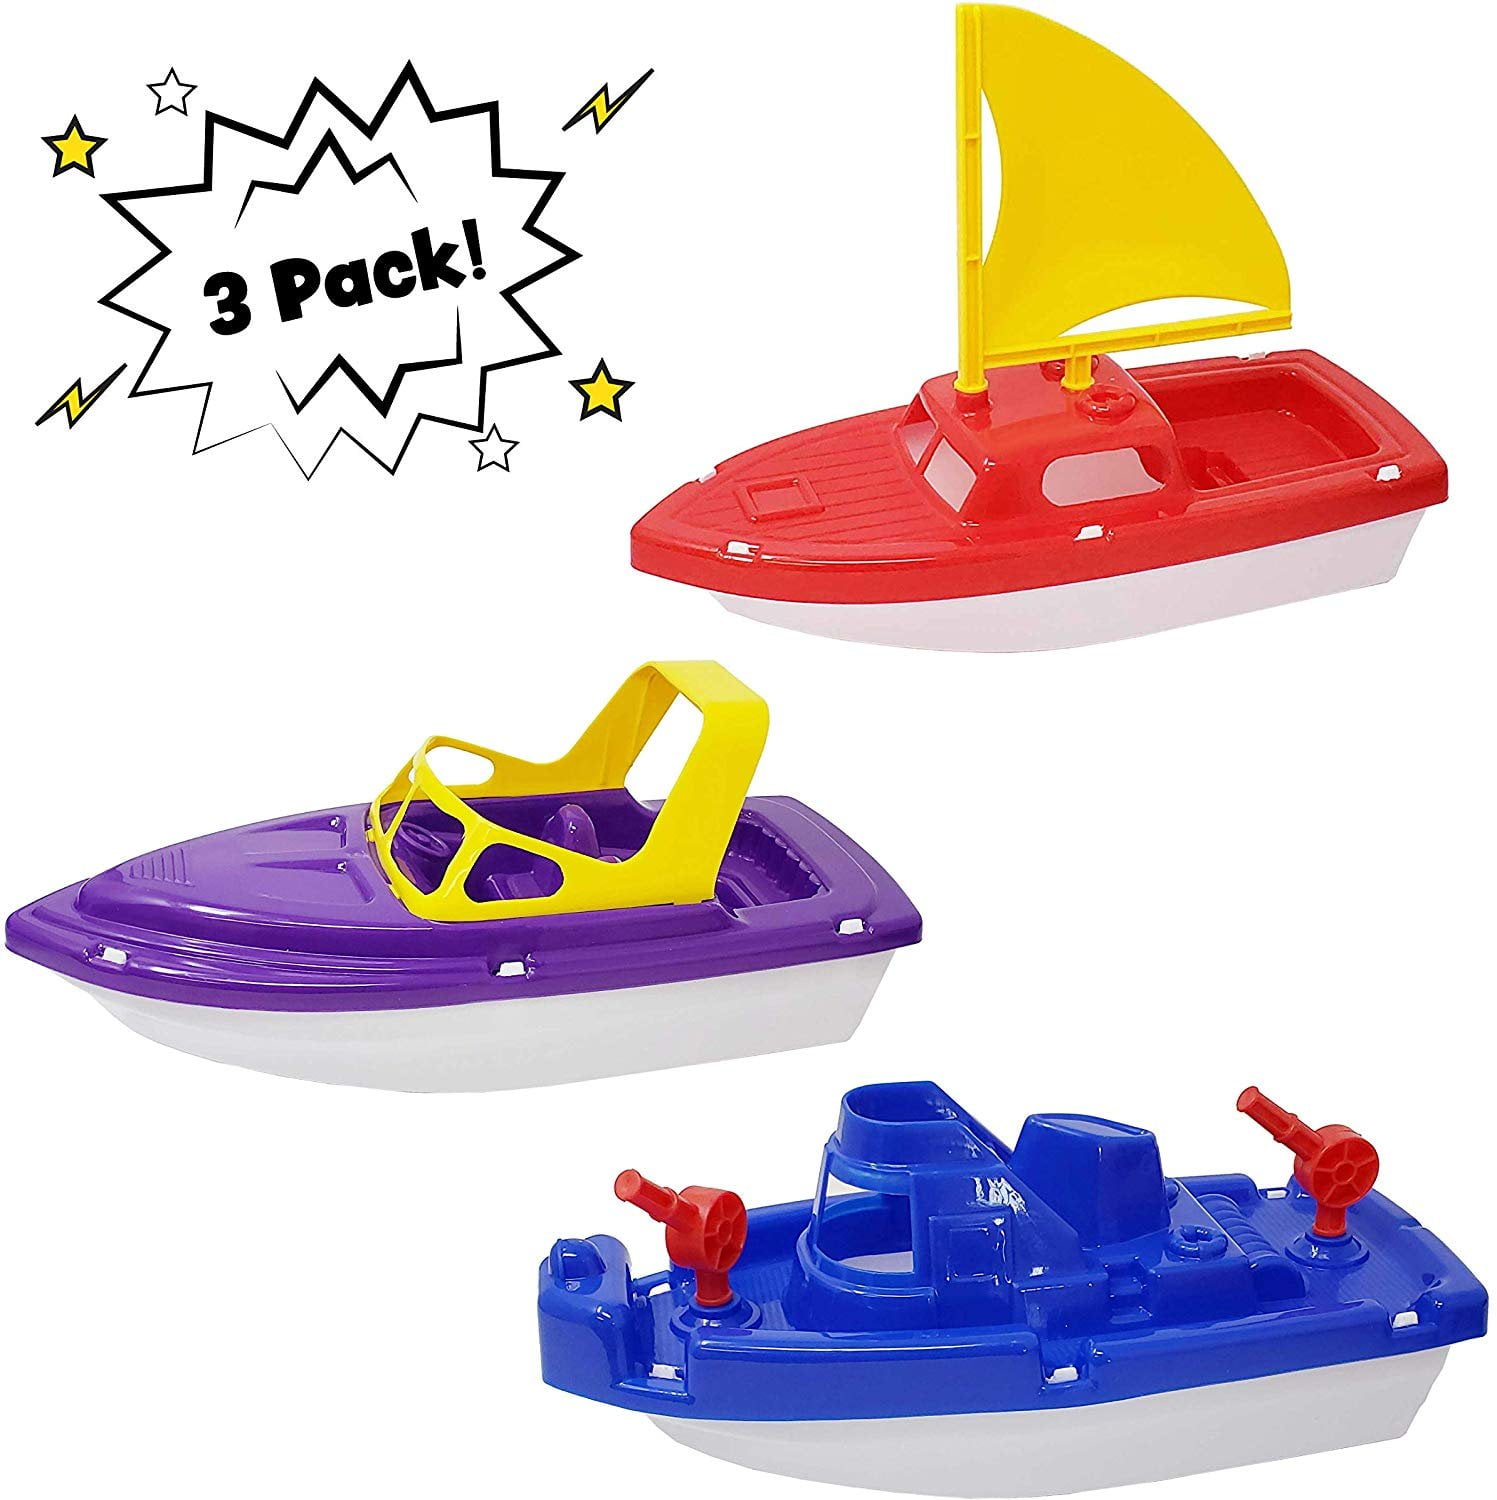 Plastic Toy Sailboats Wow Blog